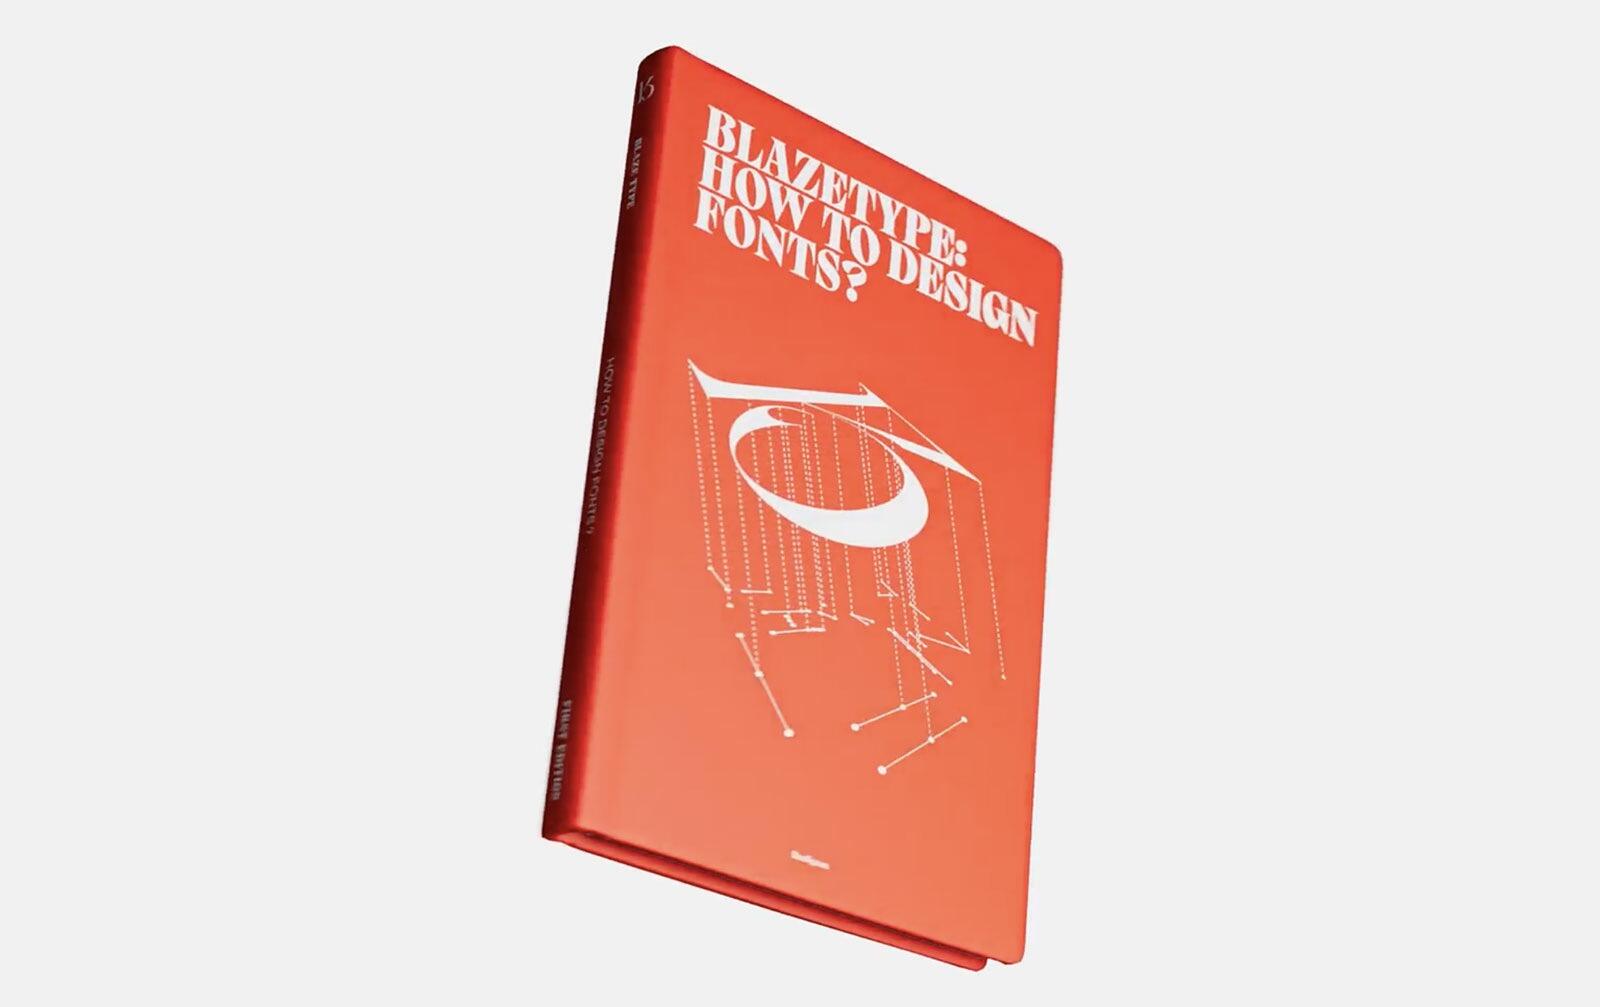 More information about "How to design fonts. A new book from Blaze Type"